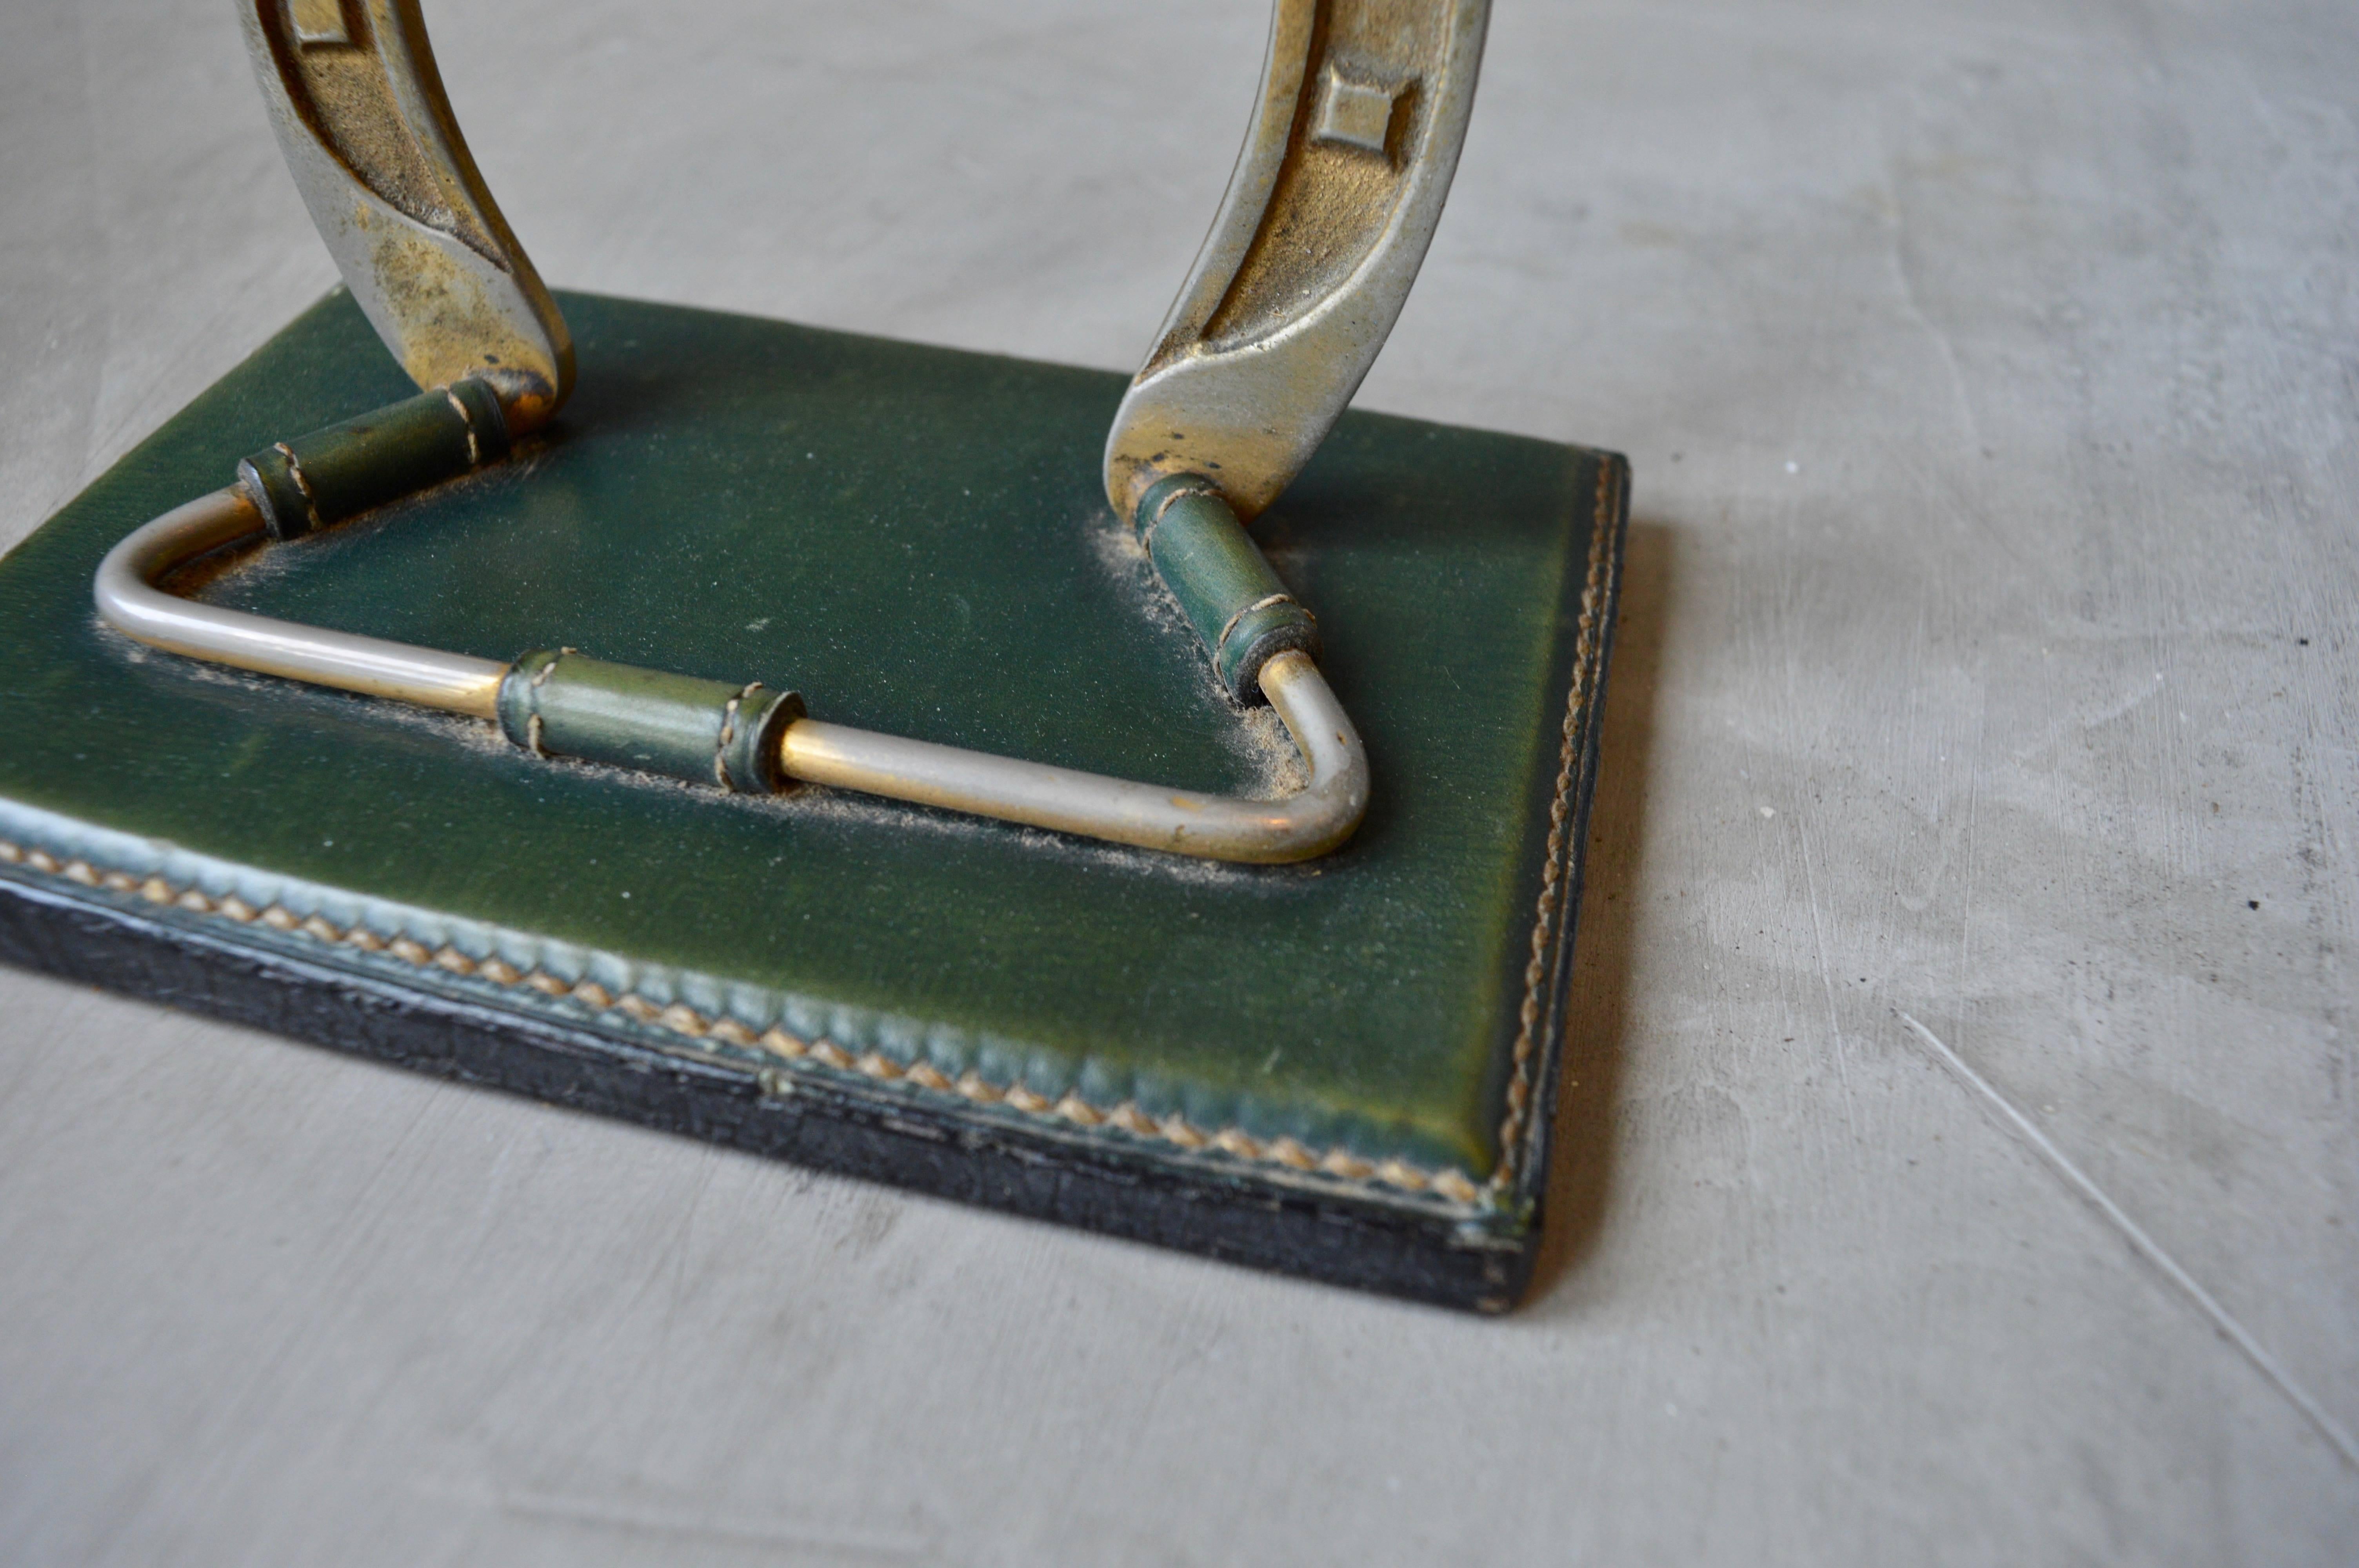 Elegant green leather jewelry tree by Jacques Adnet. Brass horseshoe on green leather base with signature Adnet contrast stitching. Great for placing necklaces and rings. Multifunctional piece. Excellent vintage condition.